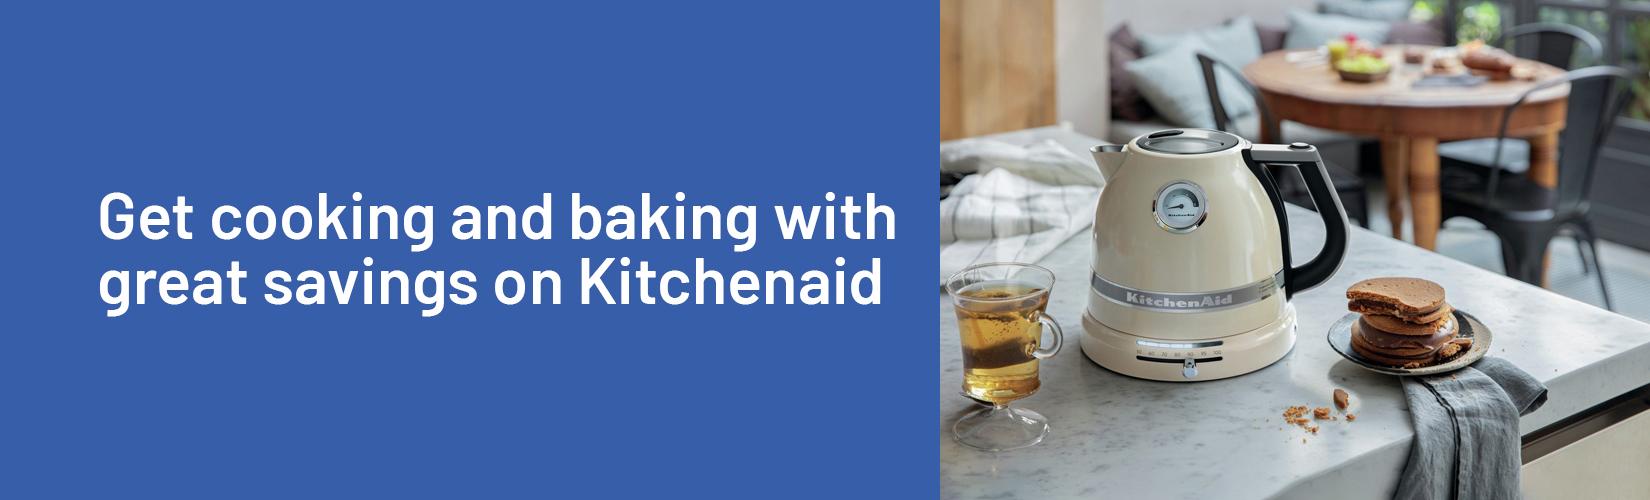 Get cooking and baking with great savings on Kitchenaid.